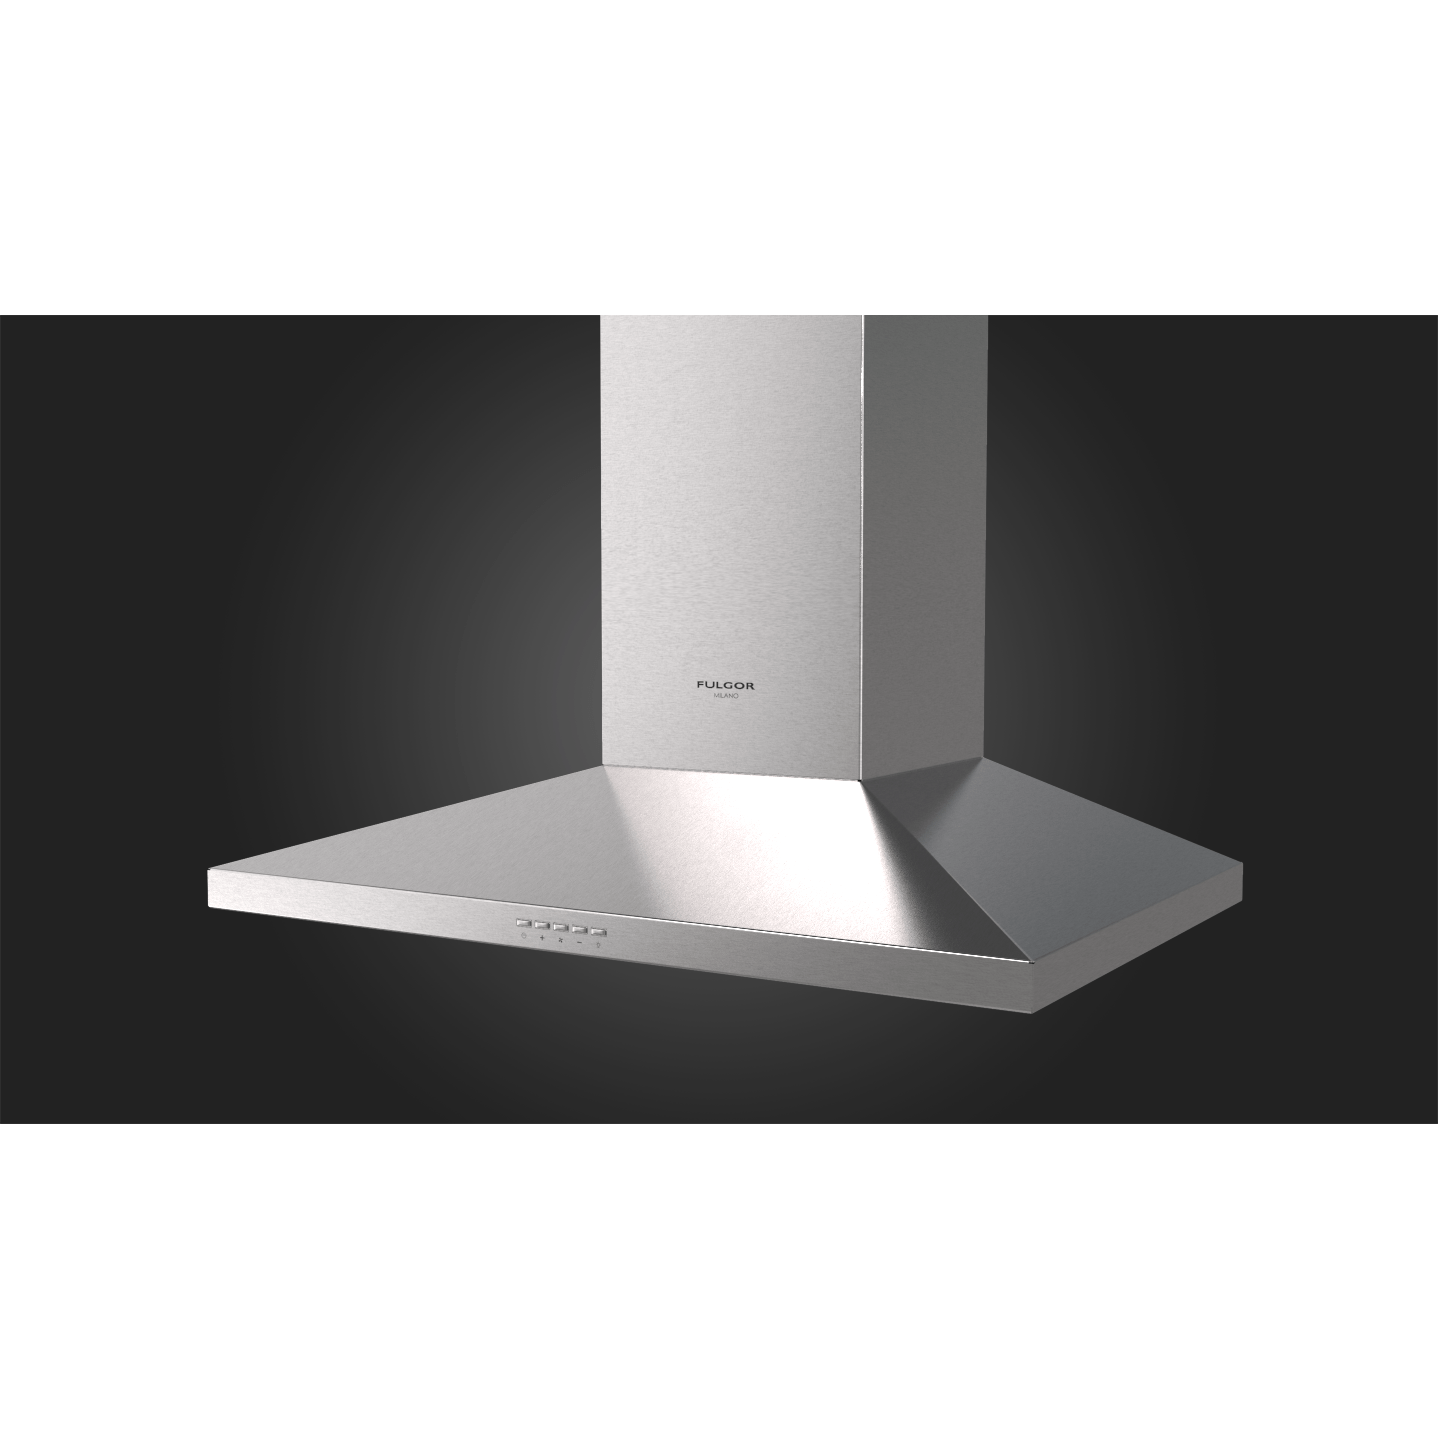 Fulgor Milano 30" Chimney Wall Mount Range Hood with 4-Speeds, Stainless Steel - F4CW30S1 Hoods F4CW30S1 Luxury Appliances Direct